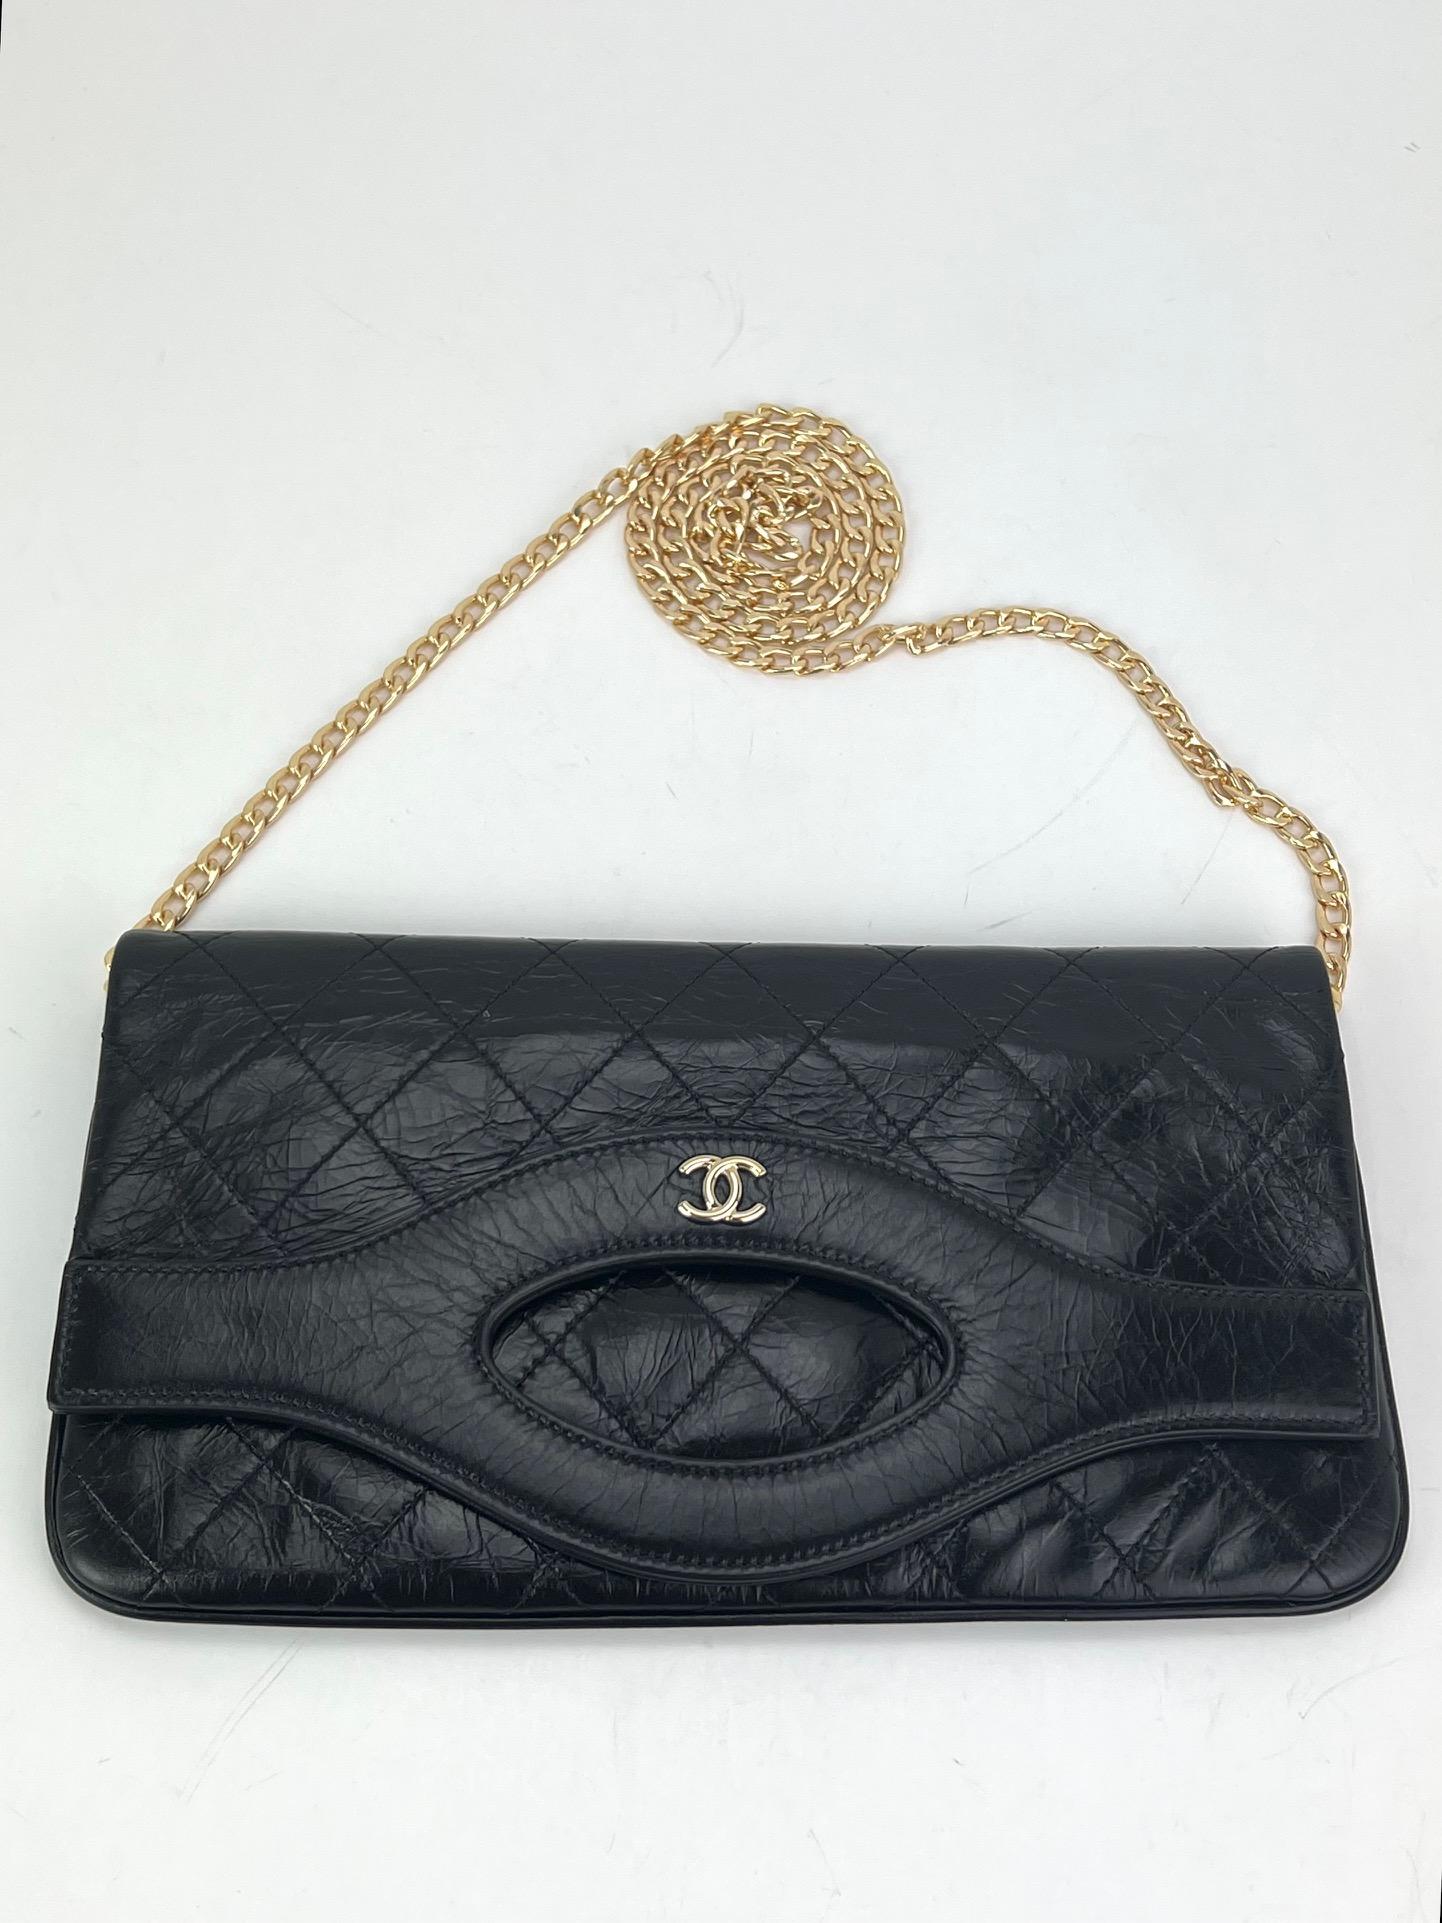 Pre-Owned  100% Authentic
CHANEL 31 Pouch Shiny Crumpled calfskin Small Clutch
RATING: A...excellent, near mint, only slight
signs of wear
MATERIAL: calfskin
STRAP: added non Chanel golden chain 47'' long
attaches to Zipper pull and lays under